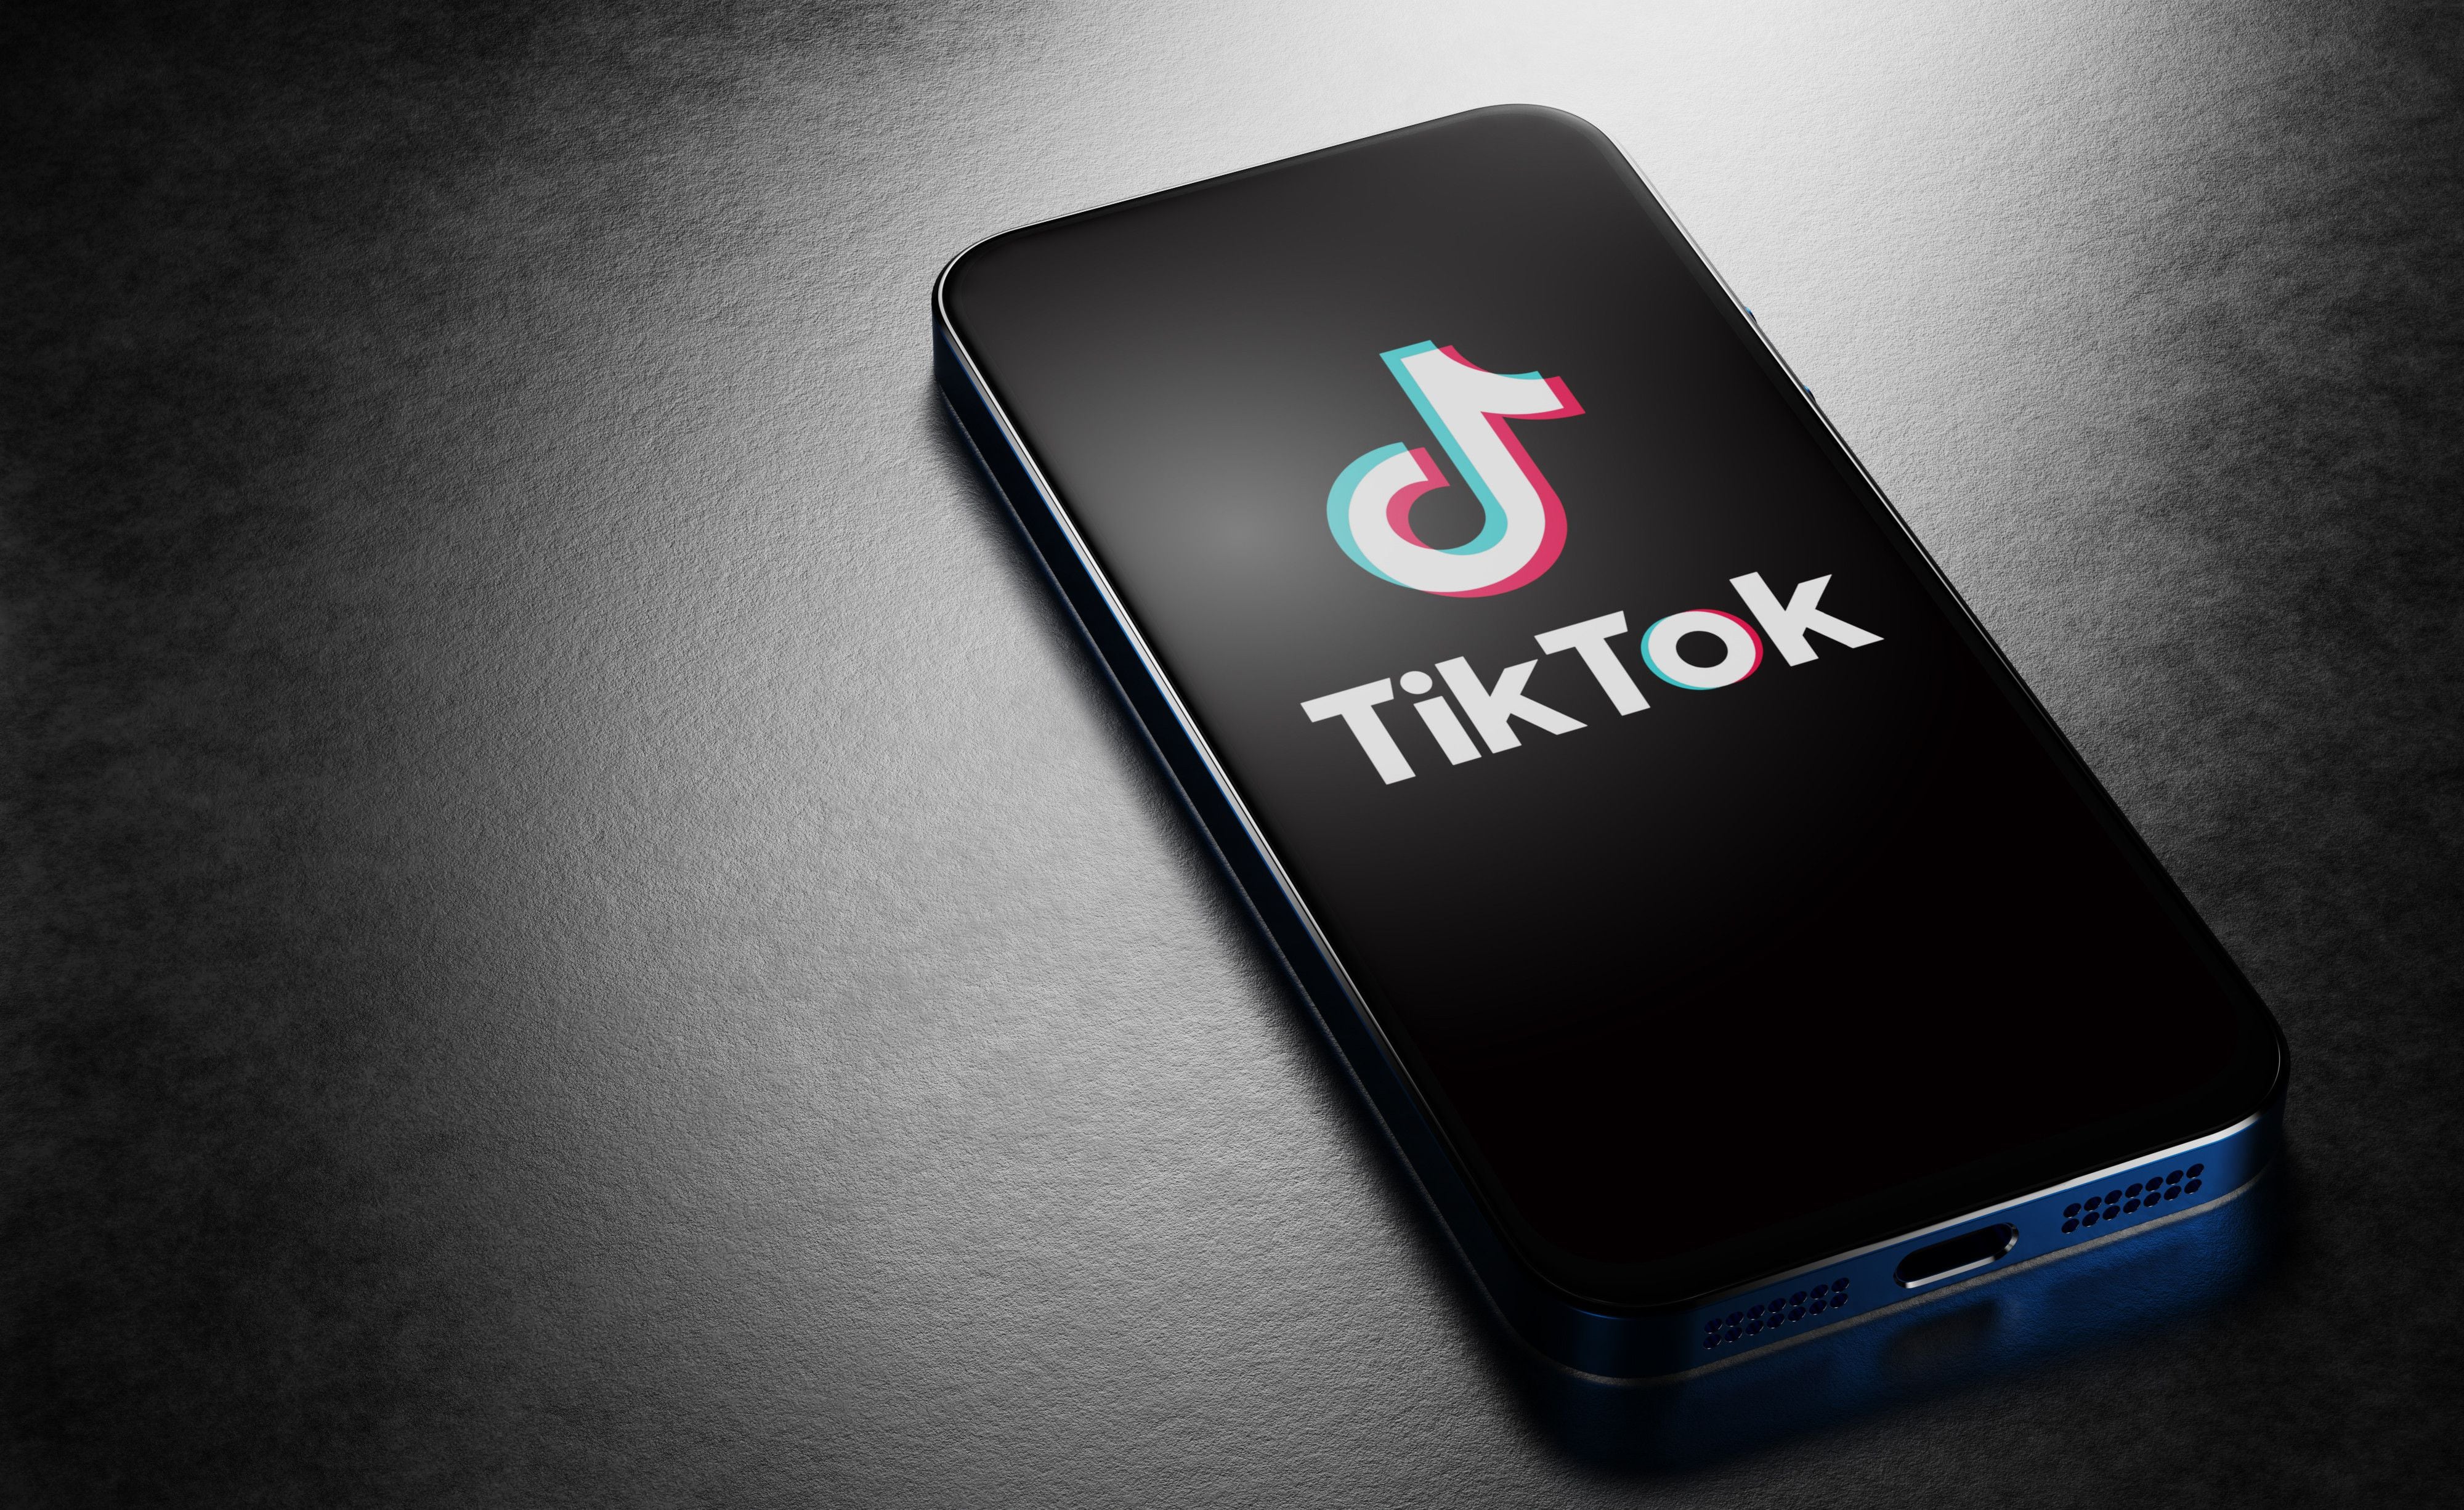 TikTok sets 60-minute daily screen time limit for under 18s - NZ Herald